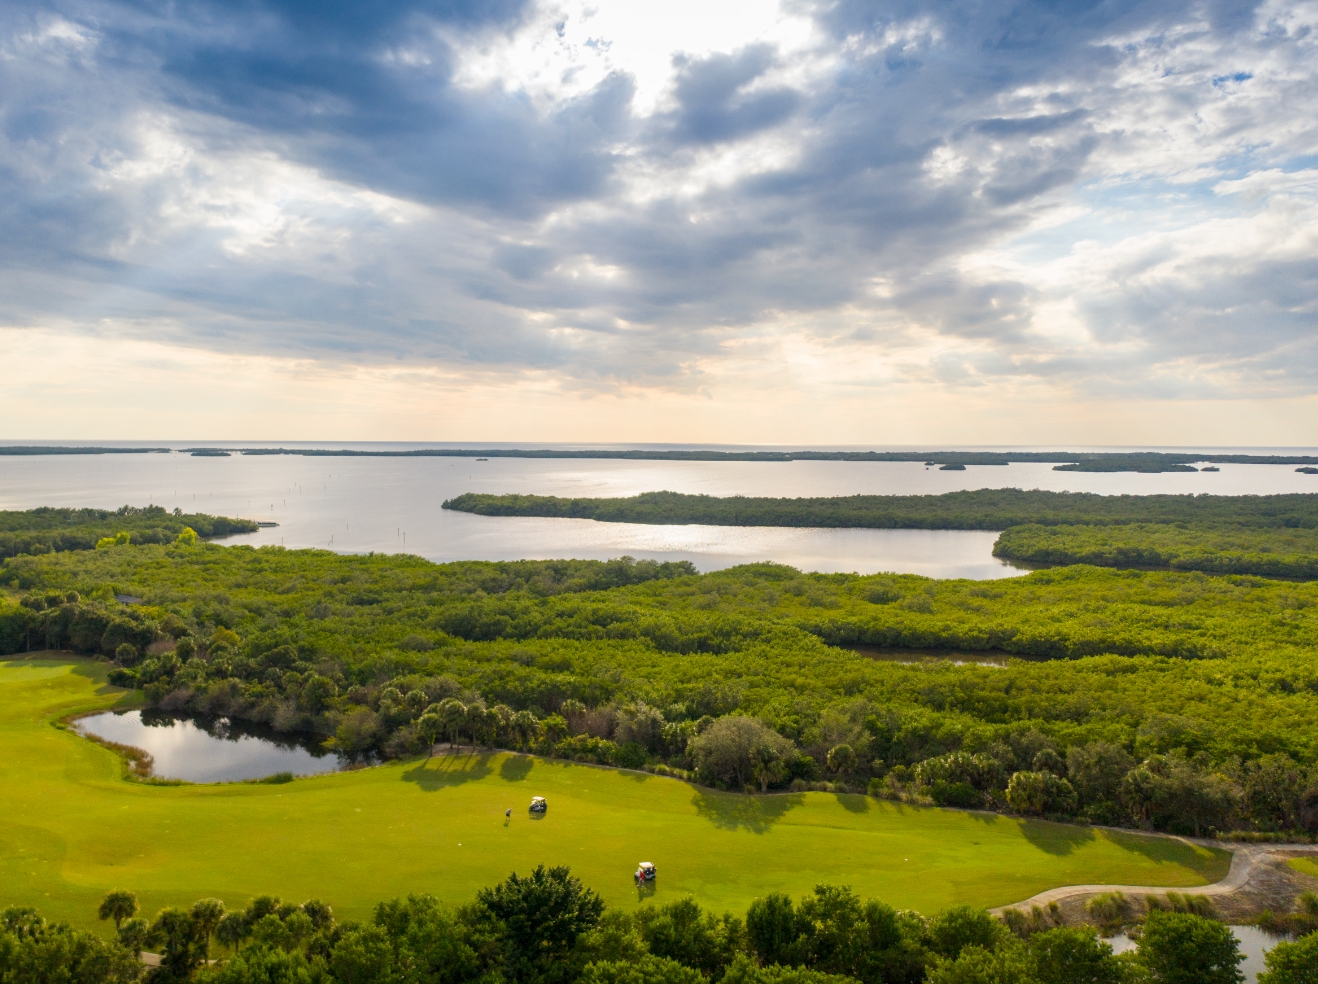 An aerial view of the Saltleaf Golf Preserve, a championship golf course in Bonita Springs, with a scenic lake.